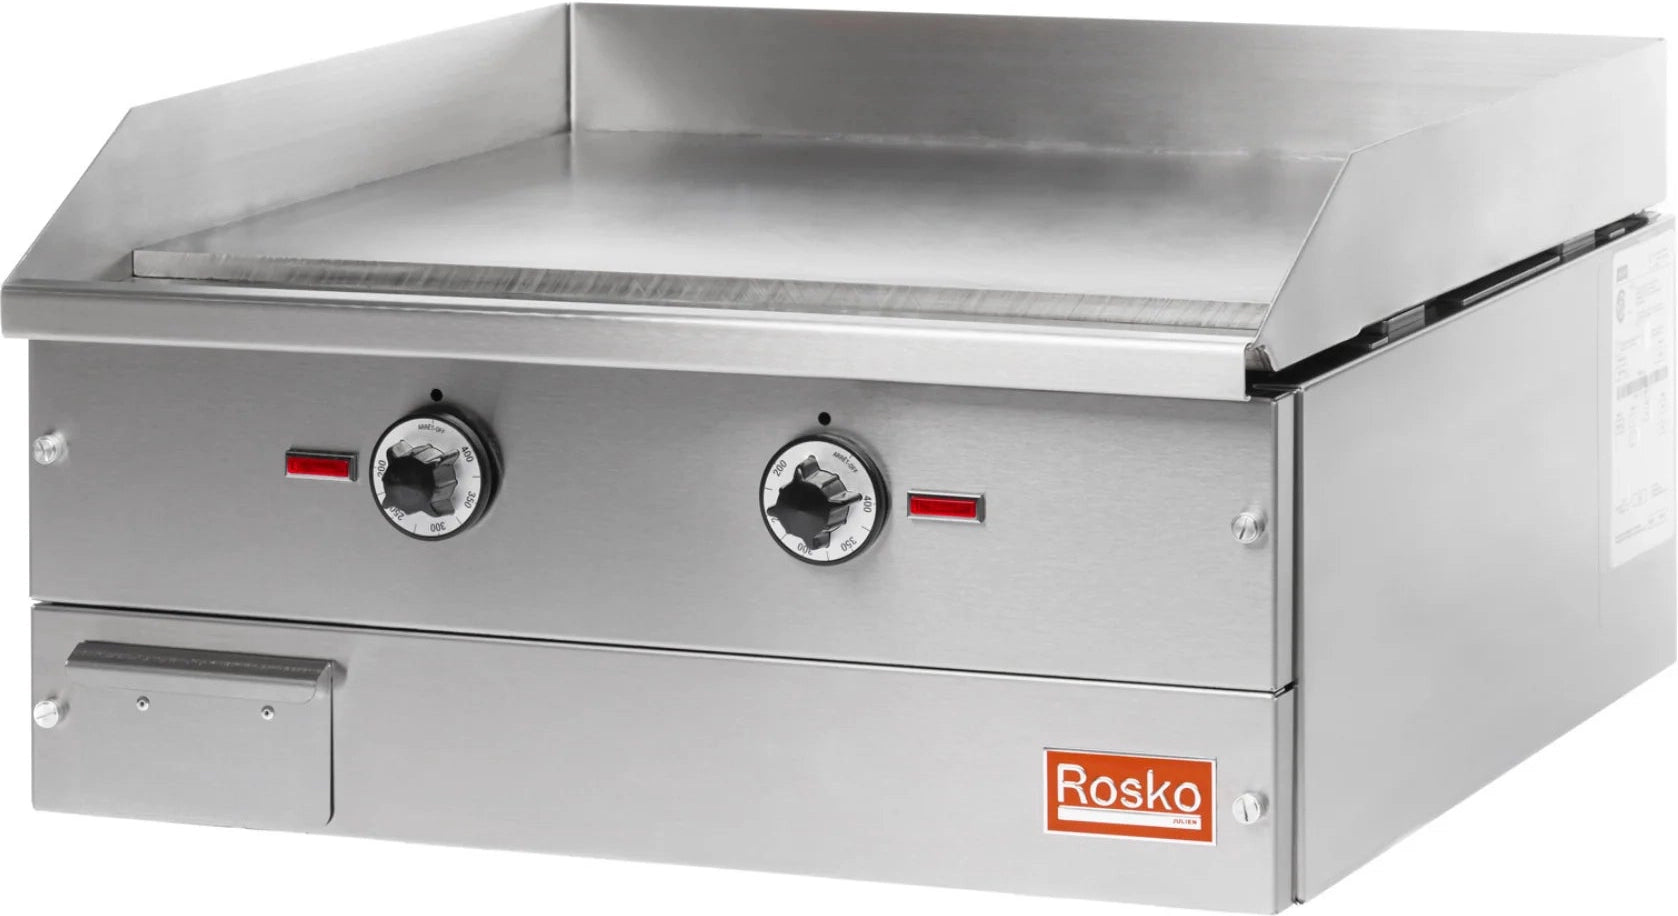 Julien - Rosko 24" Electric Countertop Griddle, 8000 W, 240 V, Chrome Plated - RO-GCE-24-2-CP